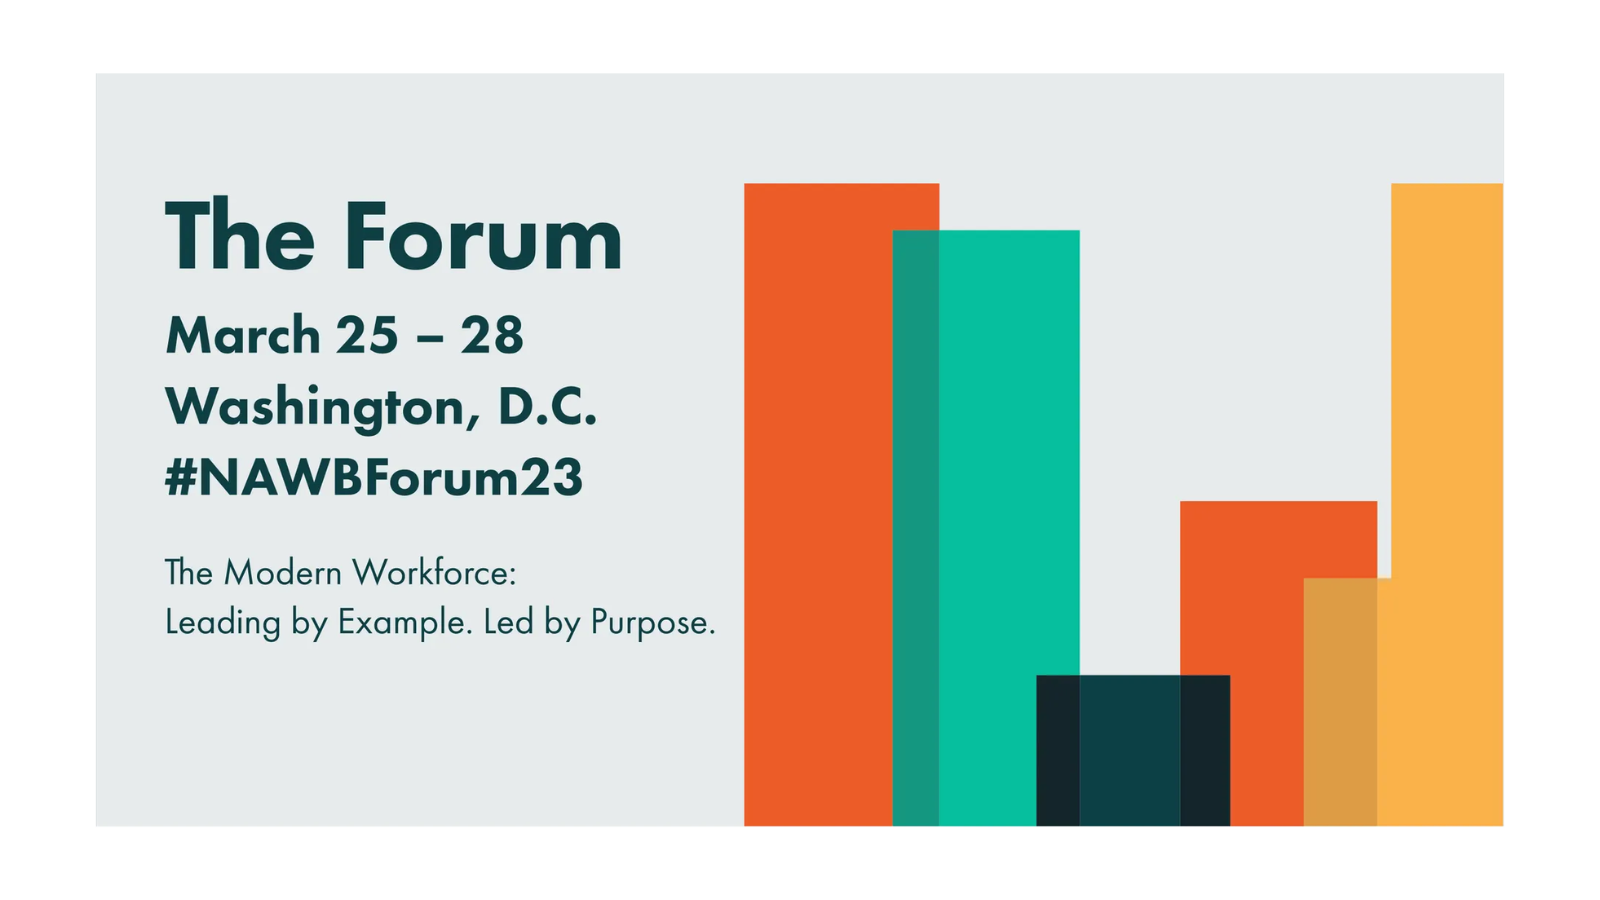 XRA CEO TO MODERATE PANEL ON LEVERAGING EMERGING TECHNOLOGIES FOR WORKFORCE AT THE NATIONAL ASSOCIATION OF WORKFORCE BOARDS (NAWB) ANNUAL FORUM